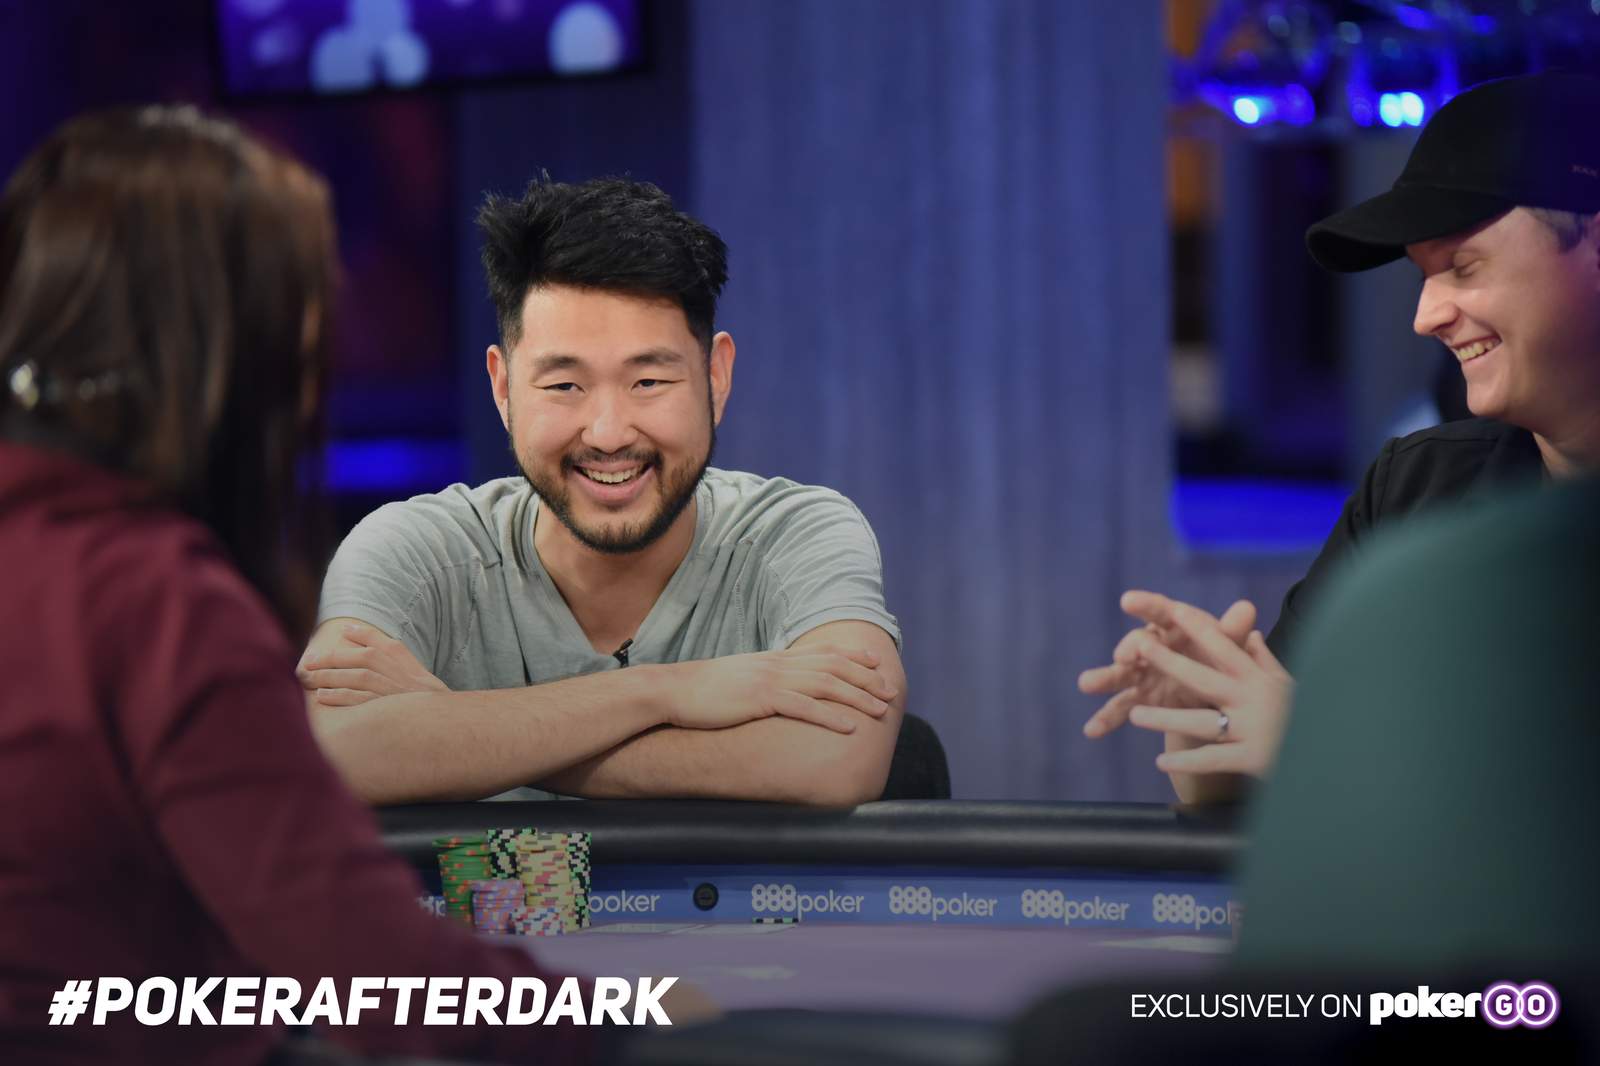 John Cynn is the Wizard of "Masters of the Main" Week on PokerGO